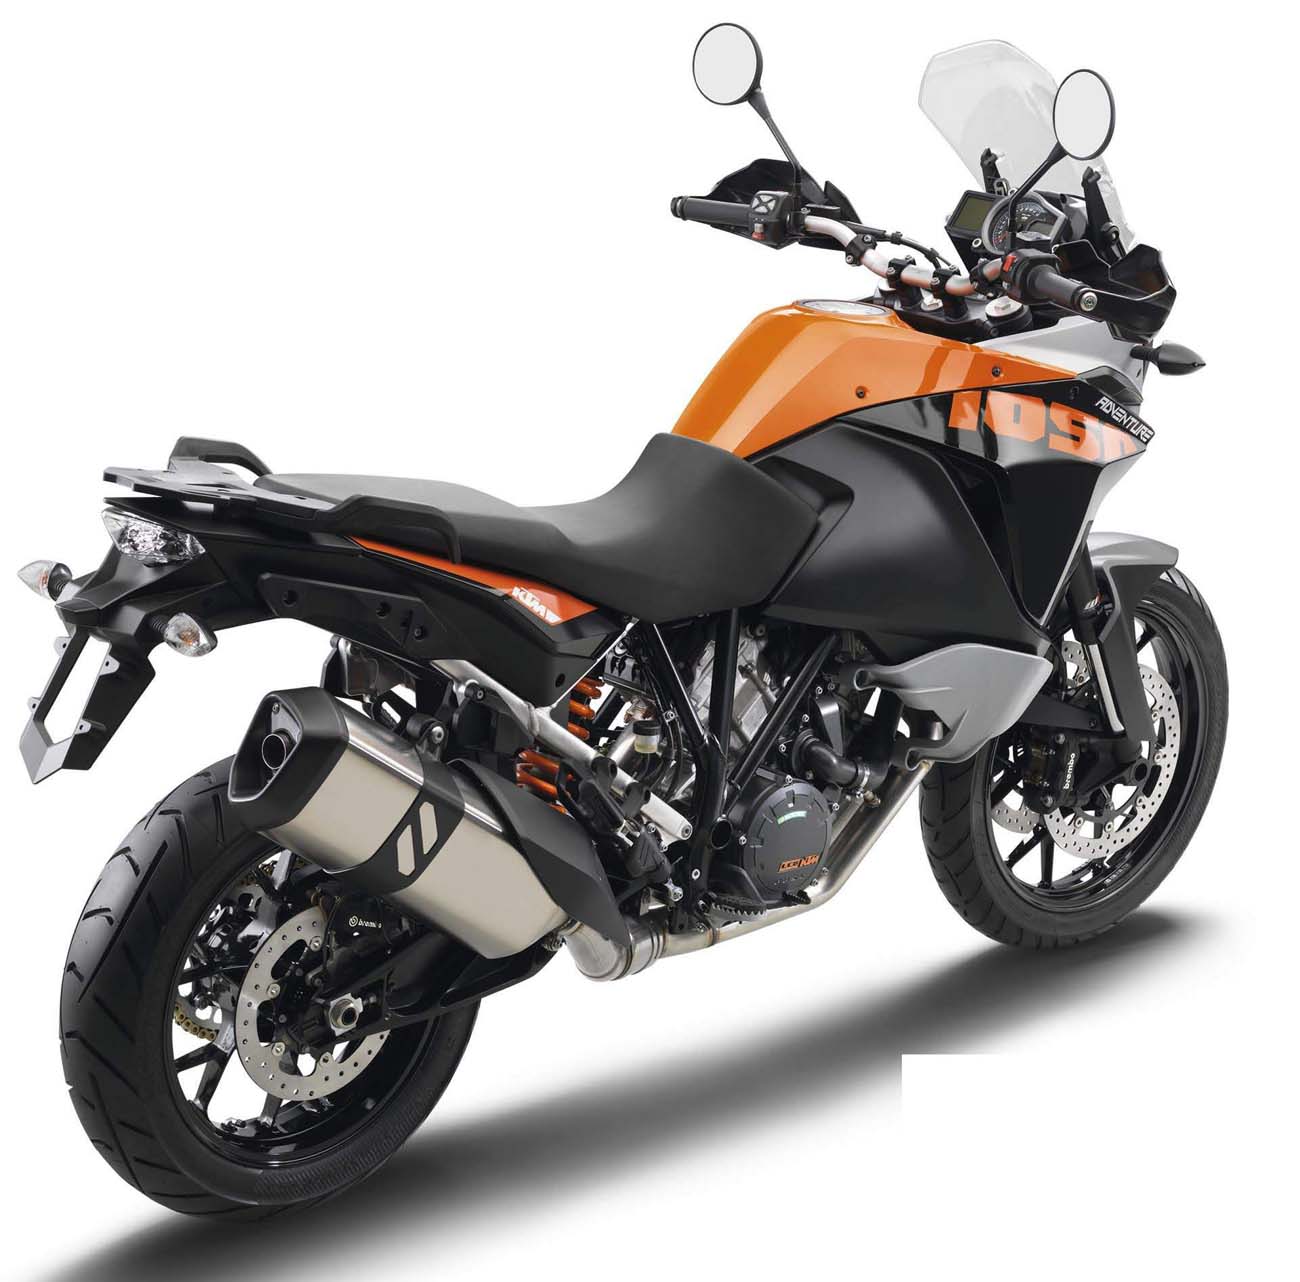 KTM 1050 Adventure technical specifications